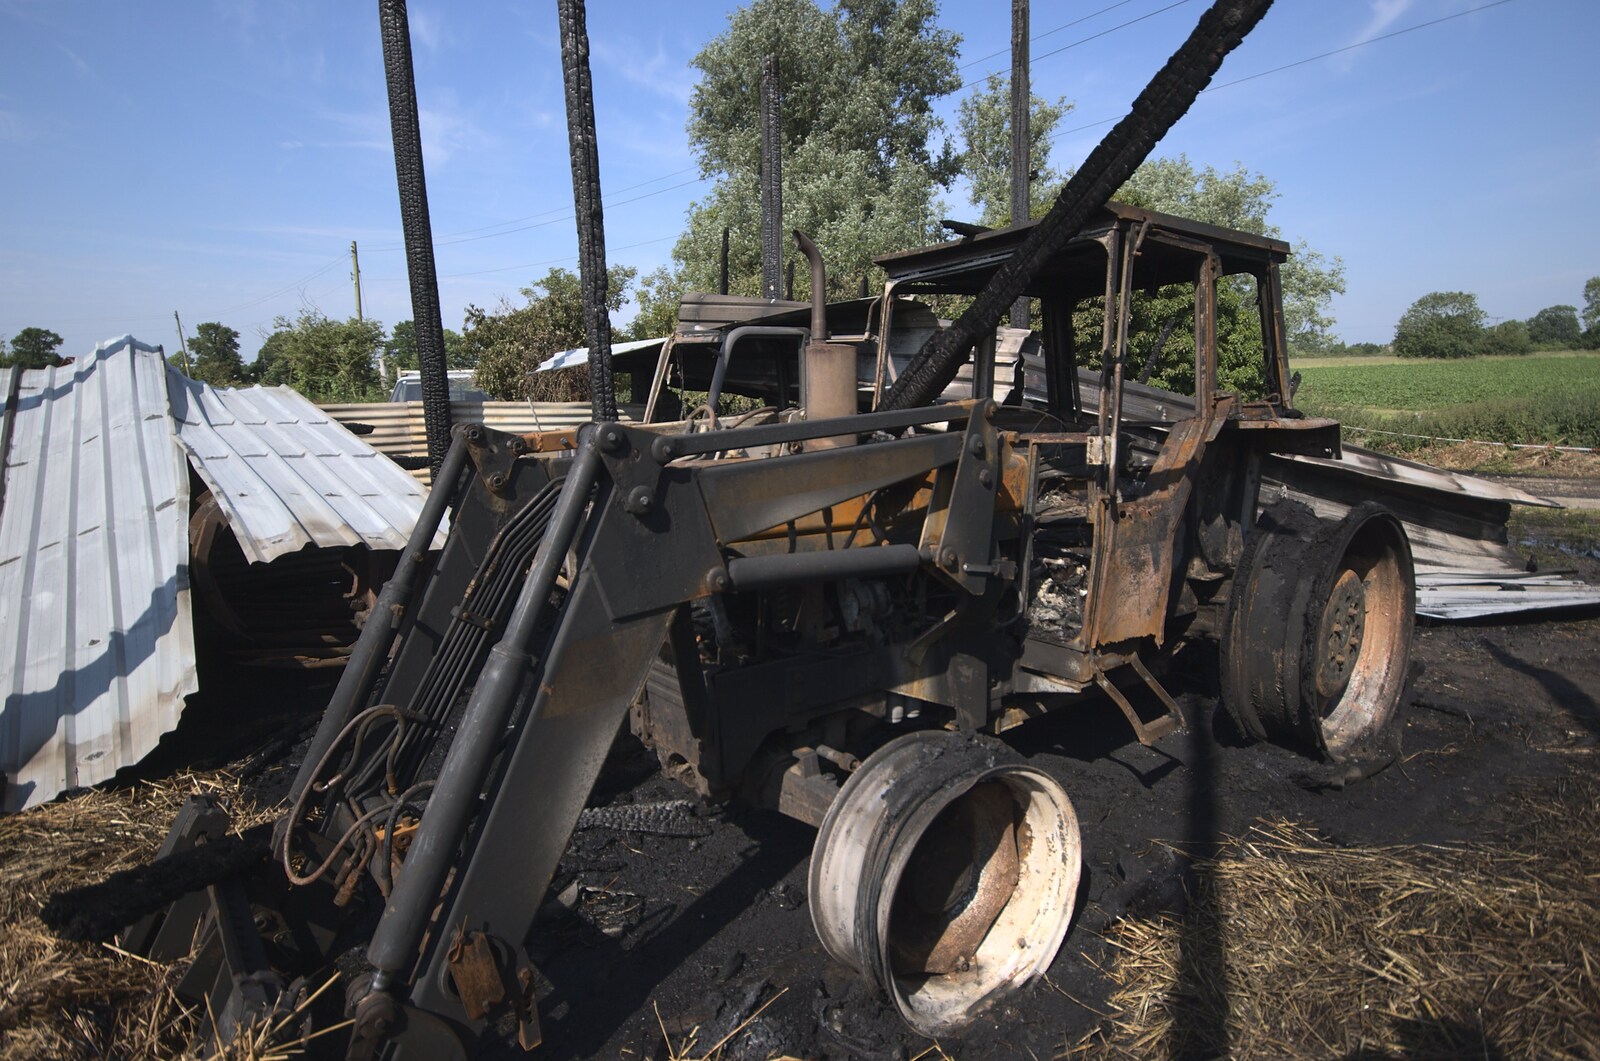 The destroyed tractor from A Fire at Valley Farm, Thrandeston, Suffolk - 24th June 2009